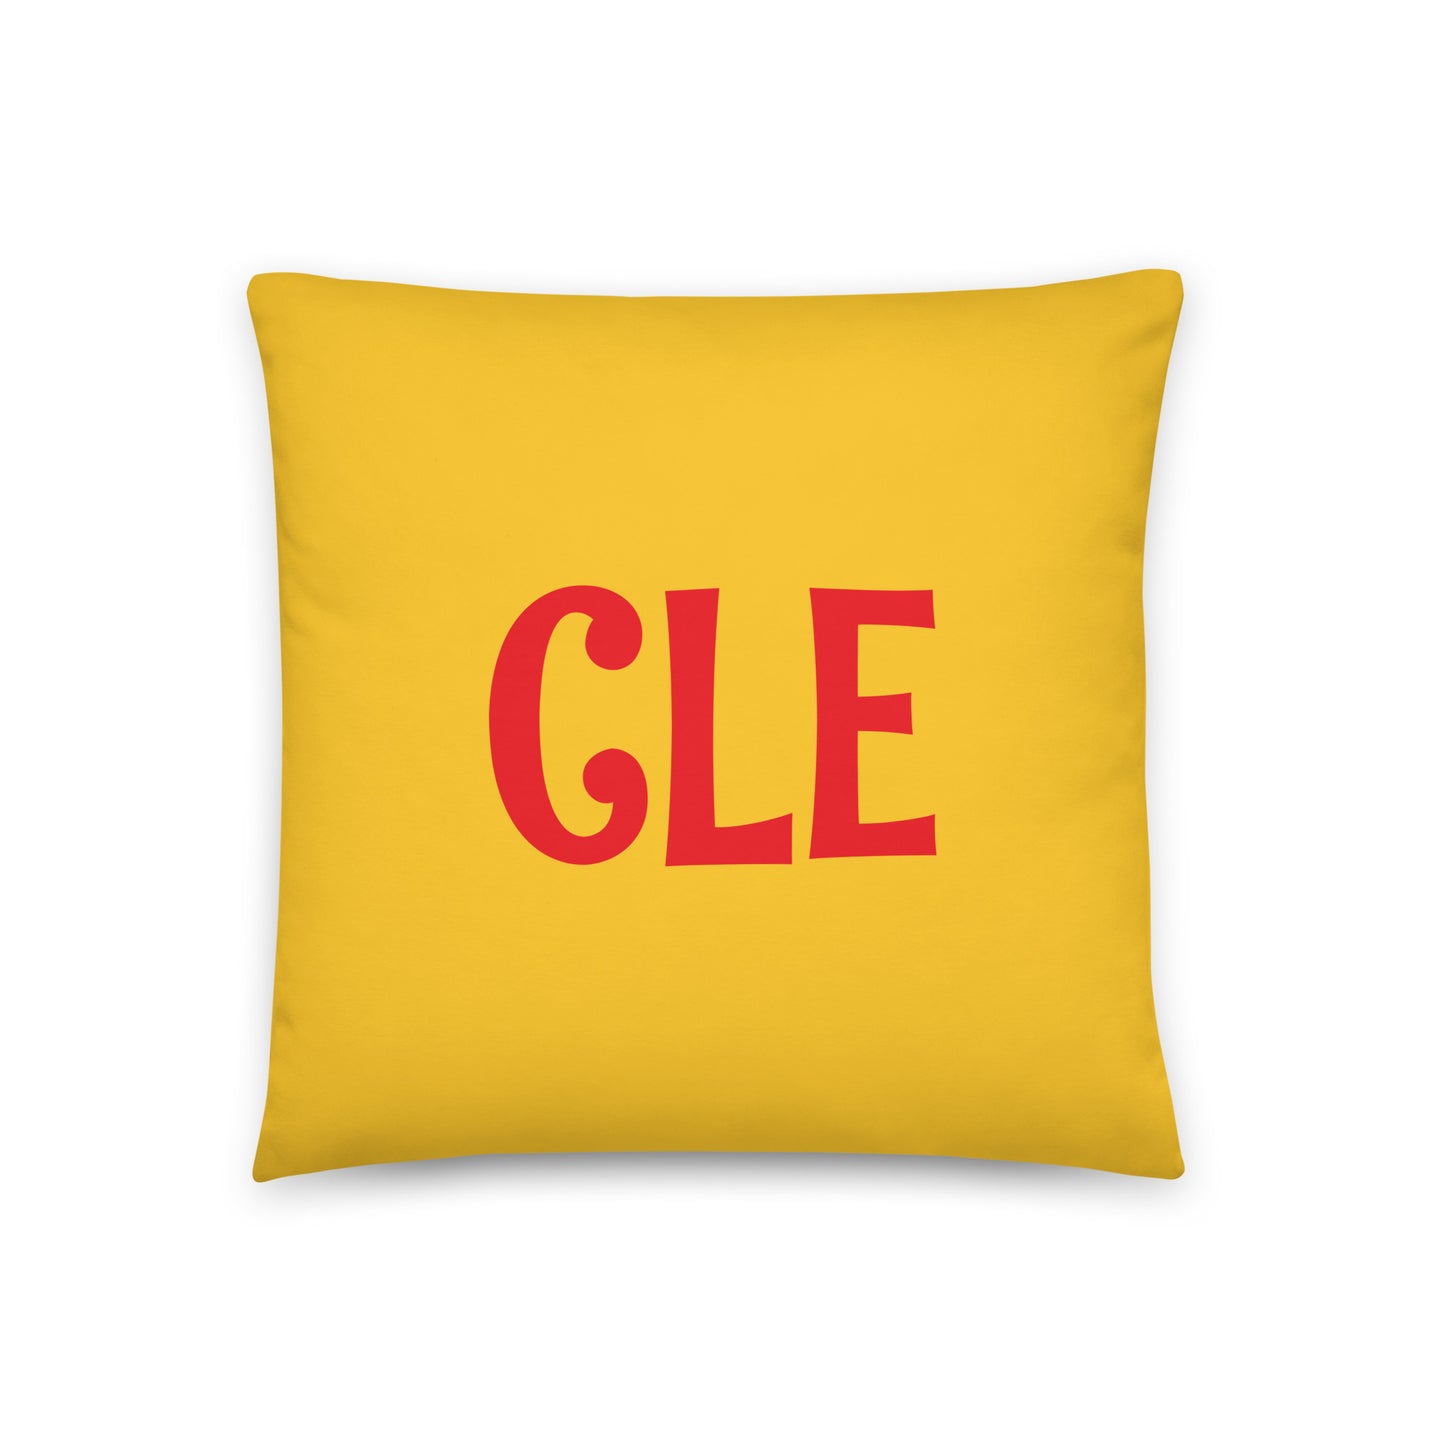 Rainbow Throw Pillow • CLE Cleveland • YHM Designs - Image 03